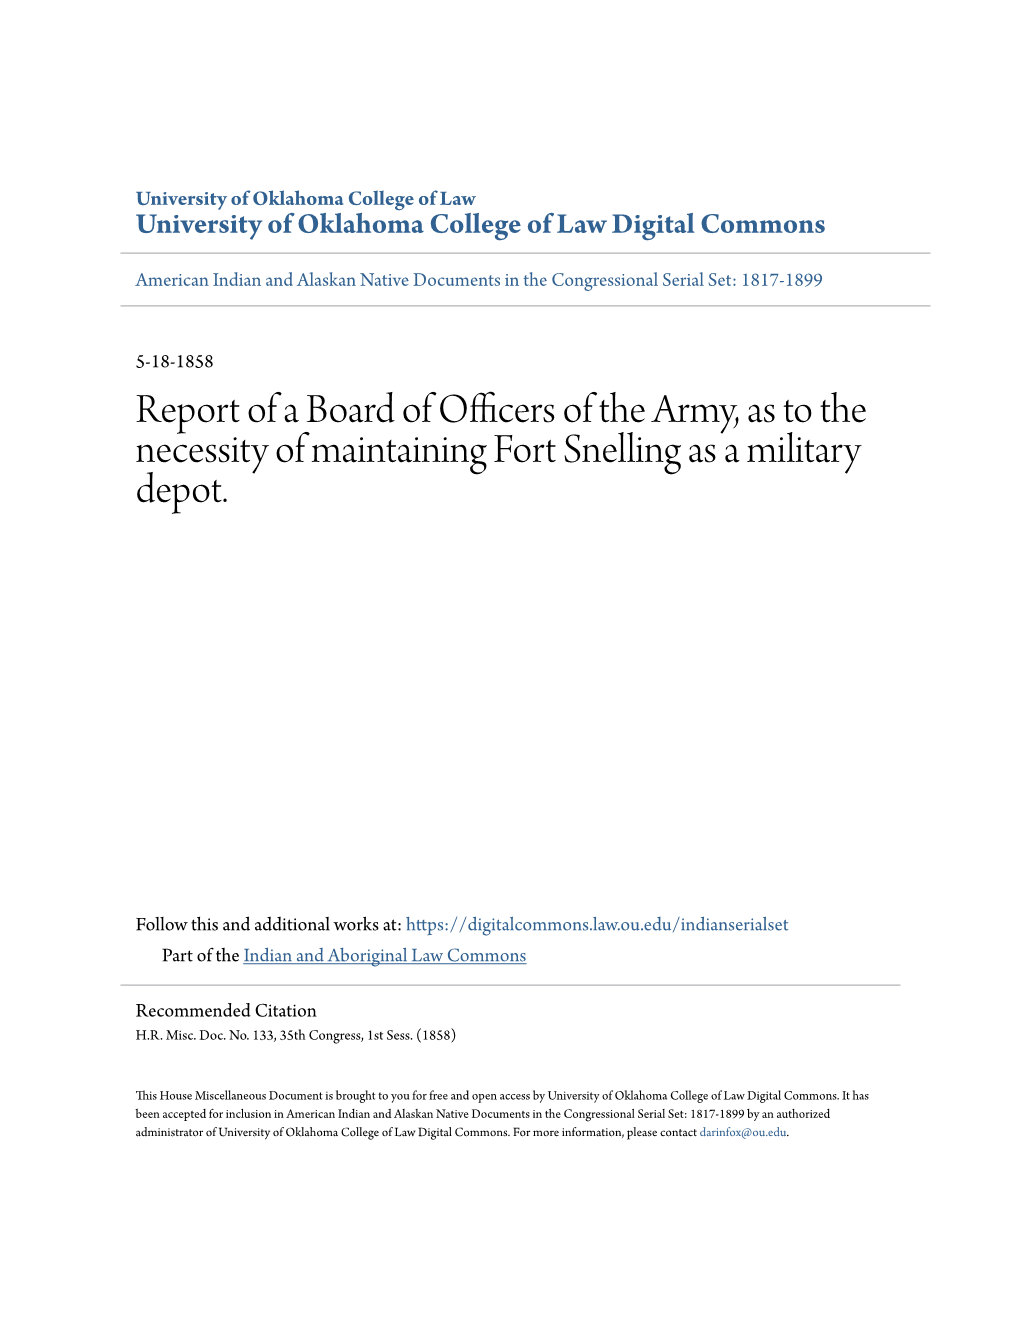 Report of a Board of Officers of the Army, As to the Necessity of Maintaining Fort Snelling As a Military Depot